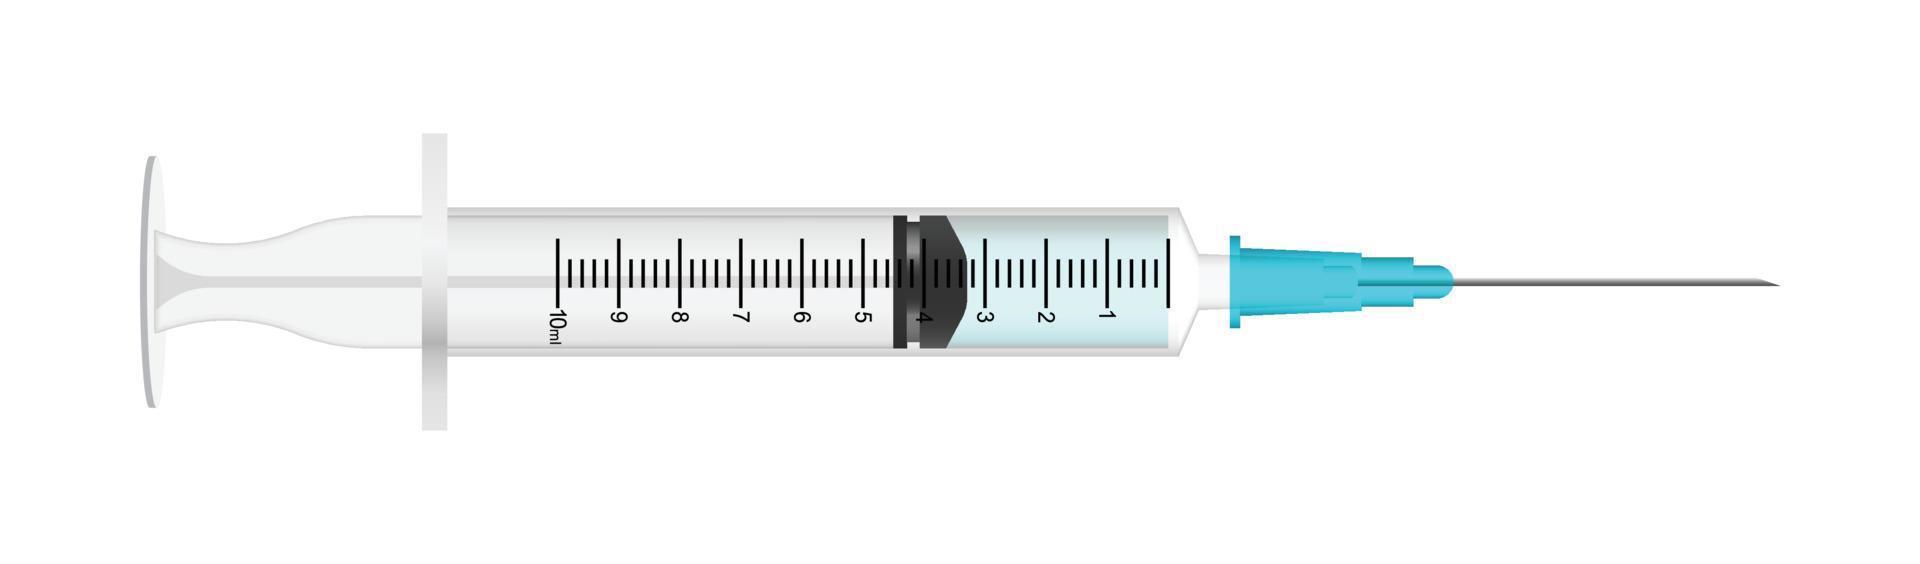 Realistic syringe icon in flat style. Coronavirus vaccine inject vector illustration on isolated background. Vaccination sign business concept.